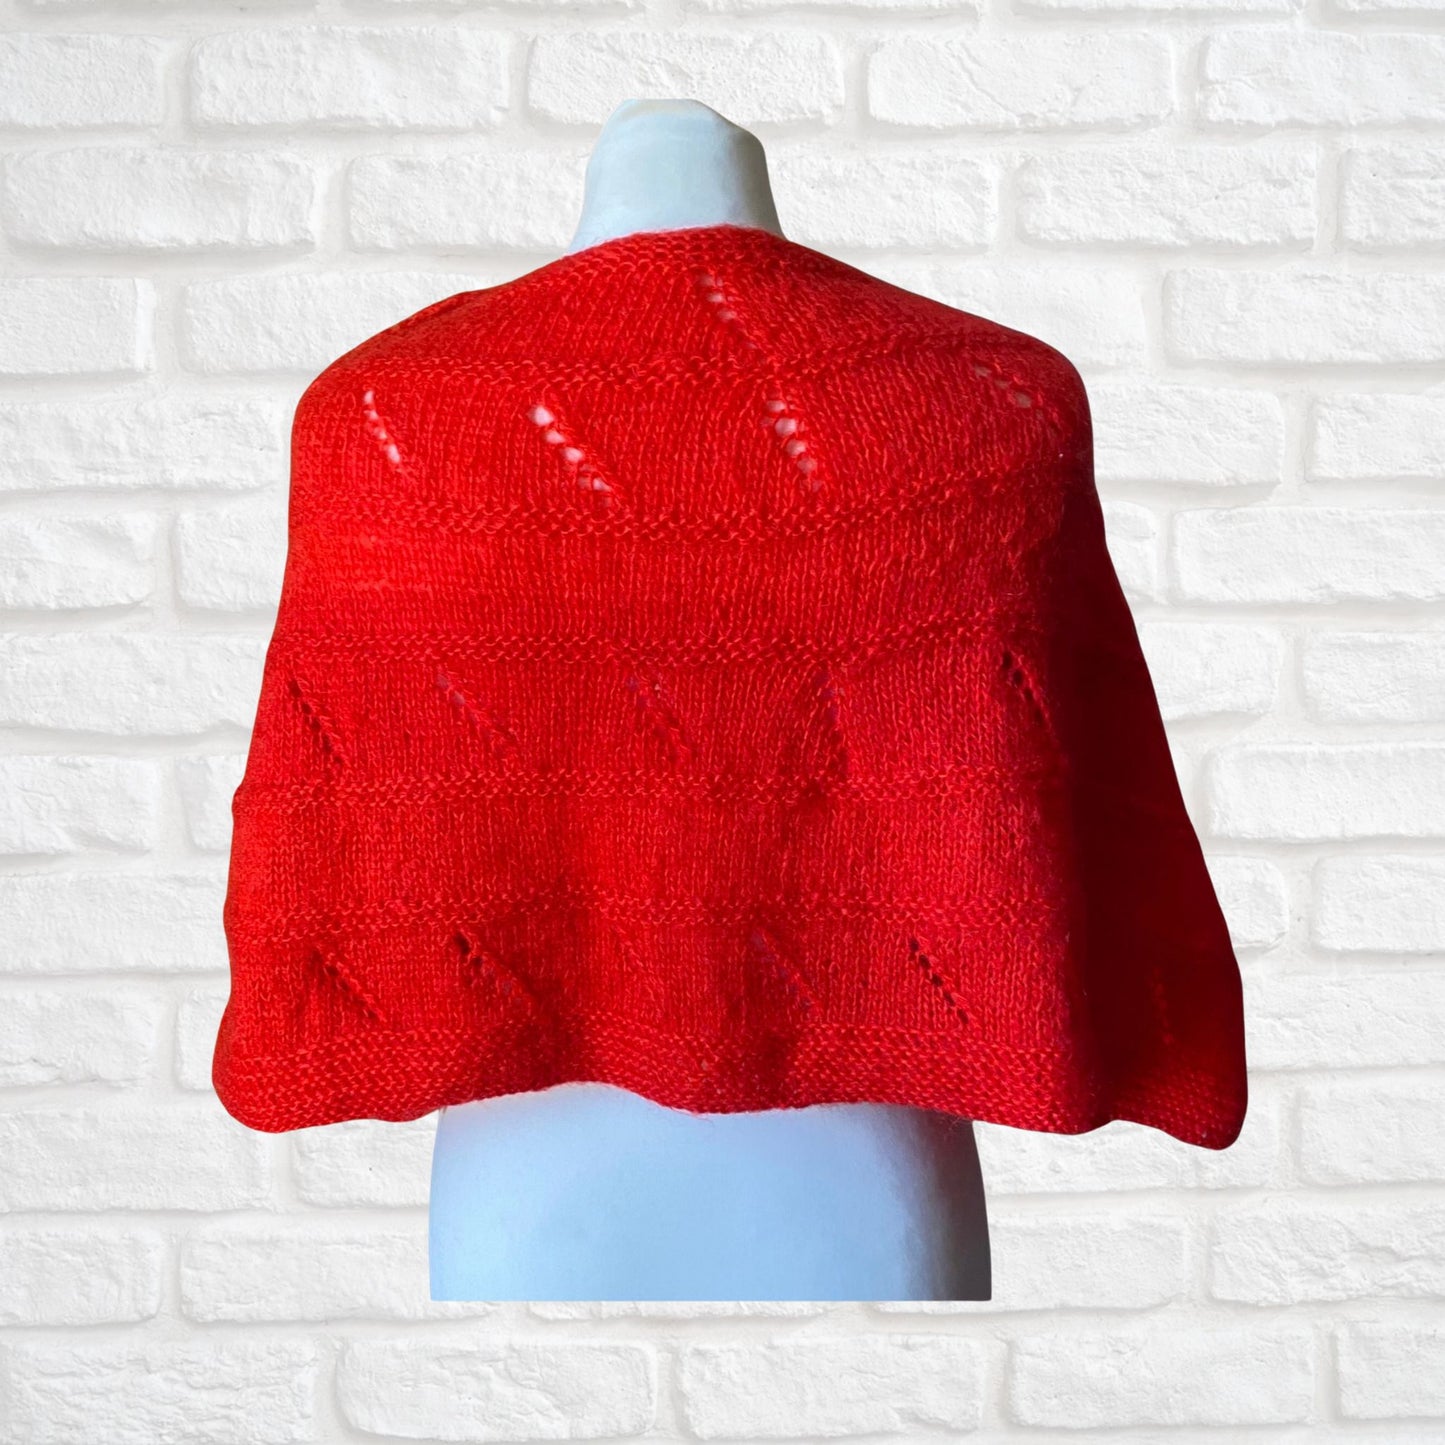 Vintage hand knitted red poncho/ cape. Approx U.K. size 8-10